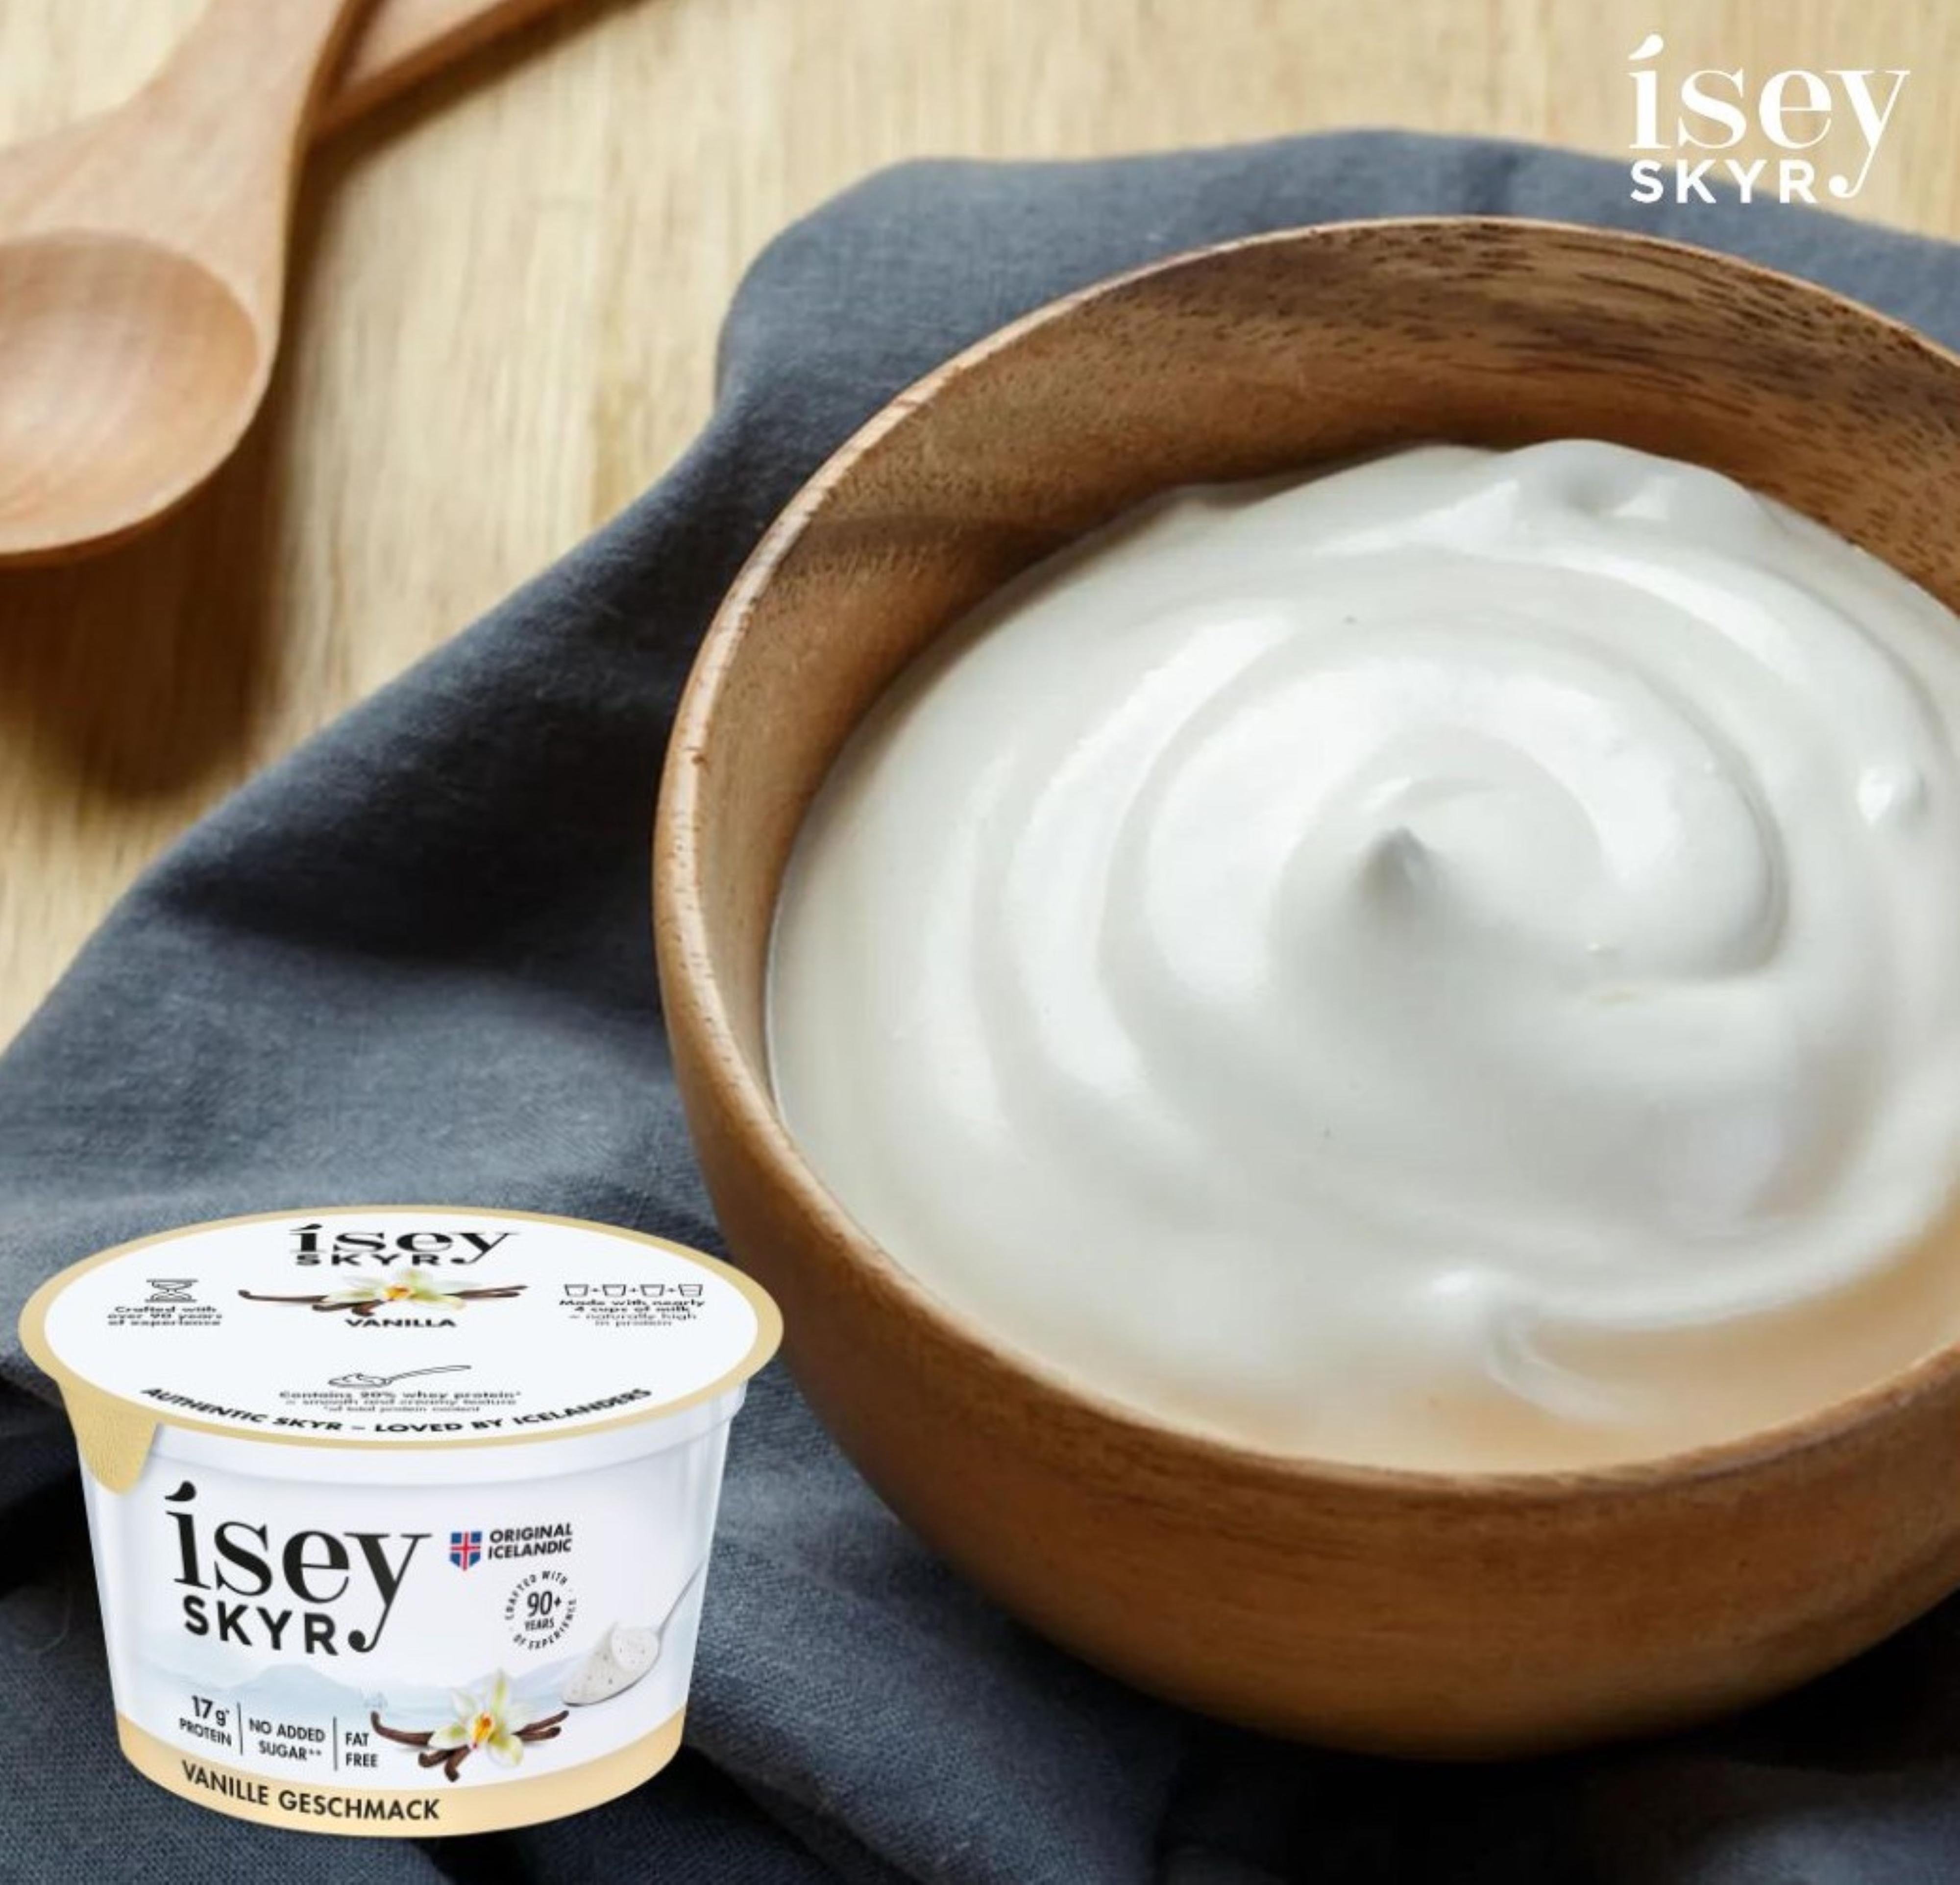 Leading Icelandic food co-operative established over a century ago, Kaupfelag Skagfirdinga, announced today (August 11) that it is going to launch ÍSEY SKYR in Hong Kong's supermarkets on August 12, and from Hong Kong to Greater China to tap into its growing demand for quality dairy products. 



